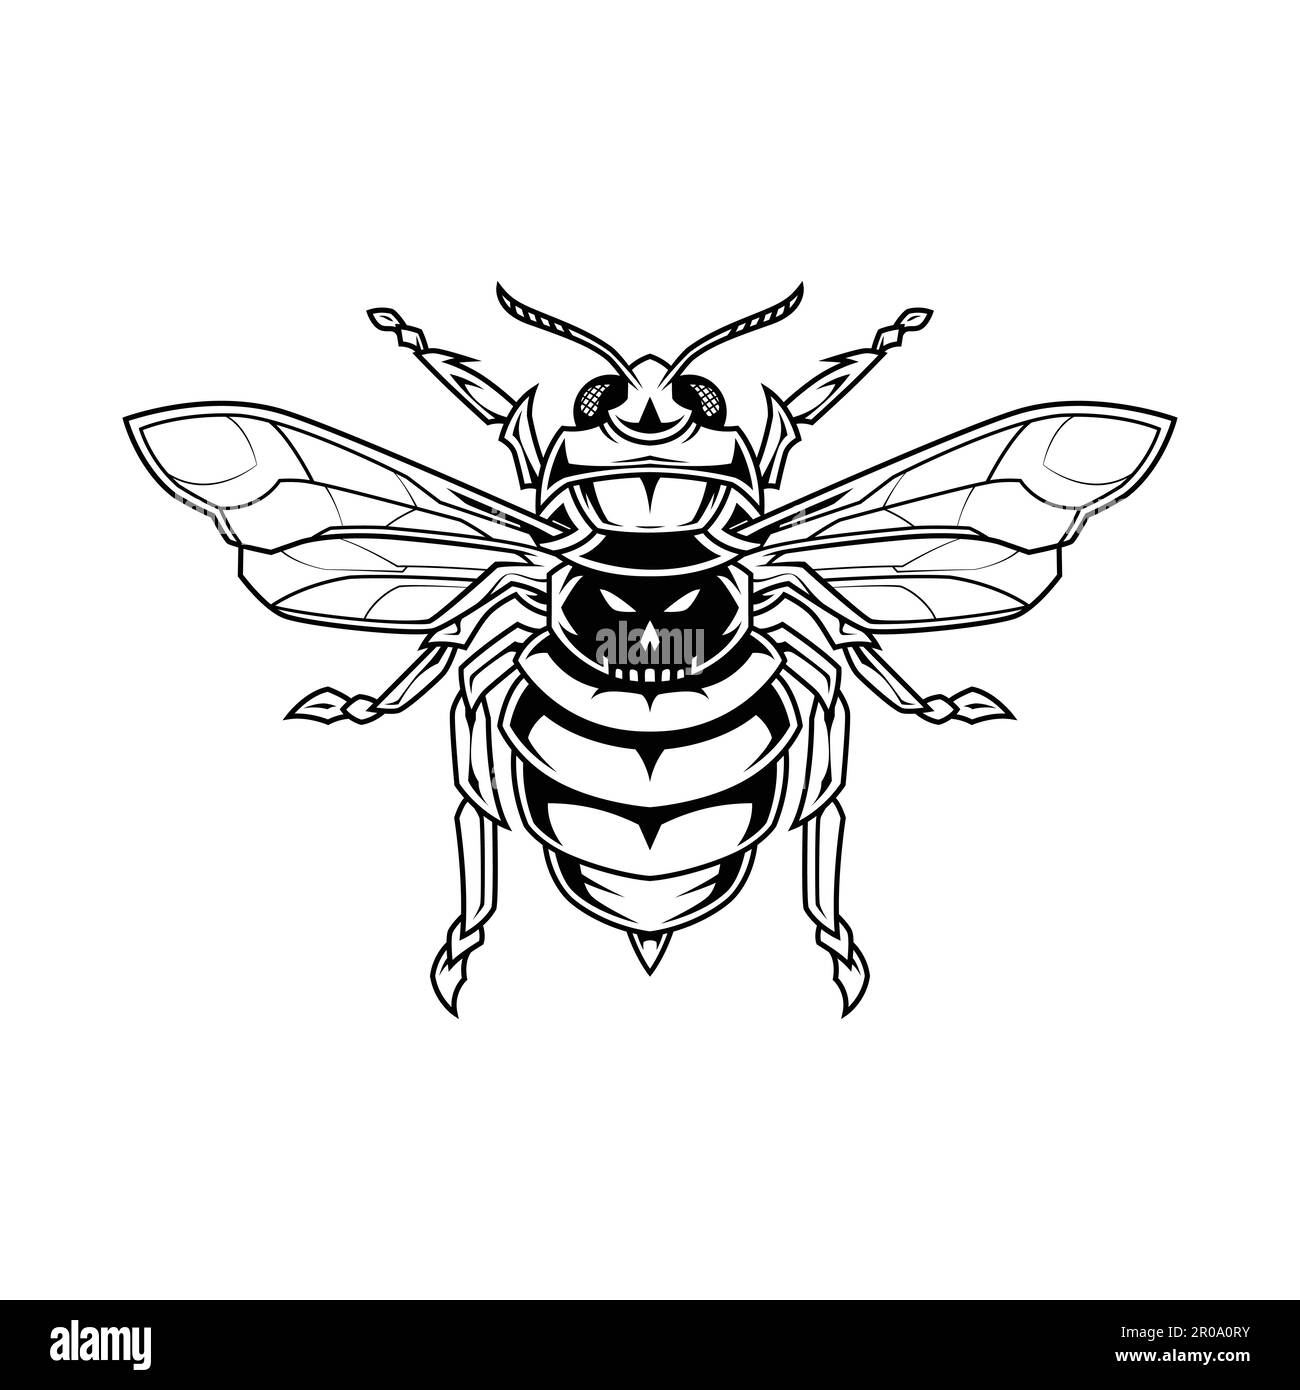 black and white bee drawing